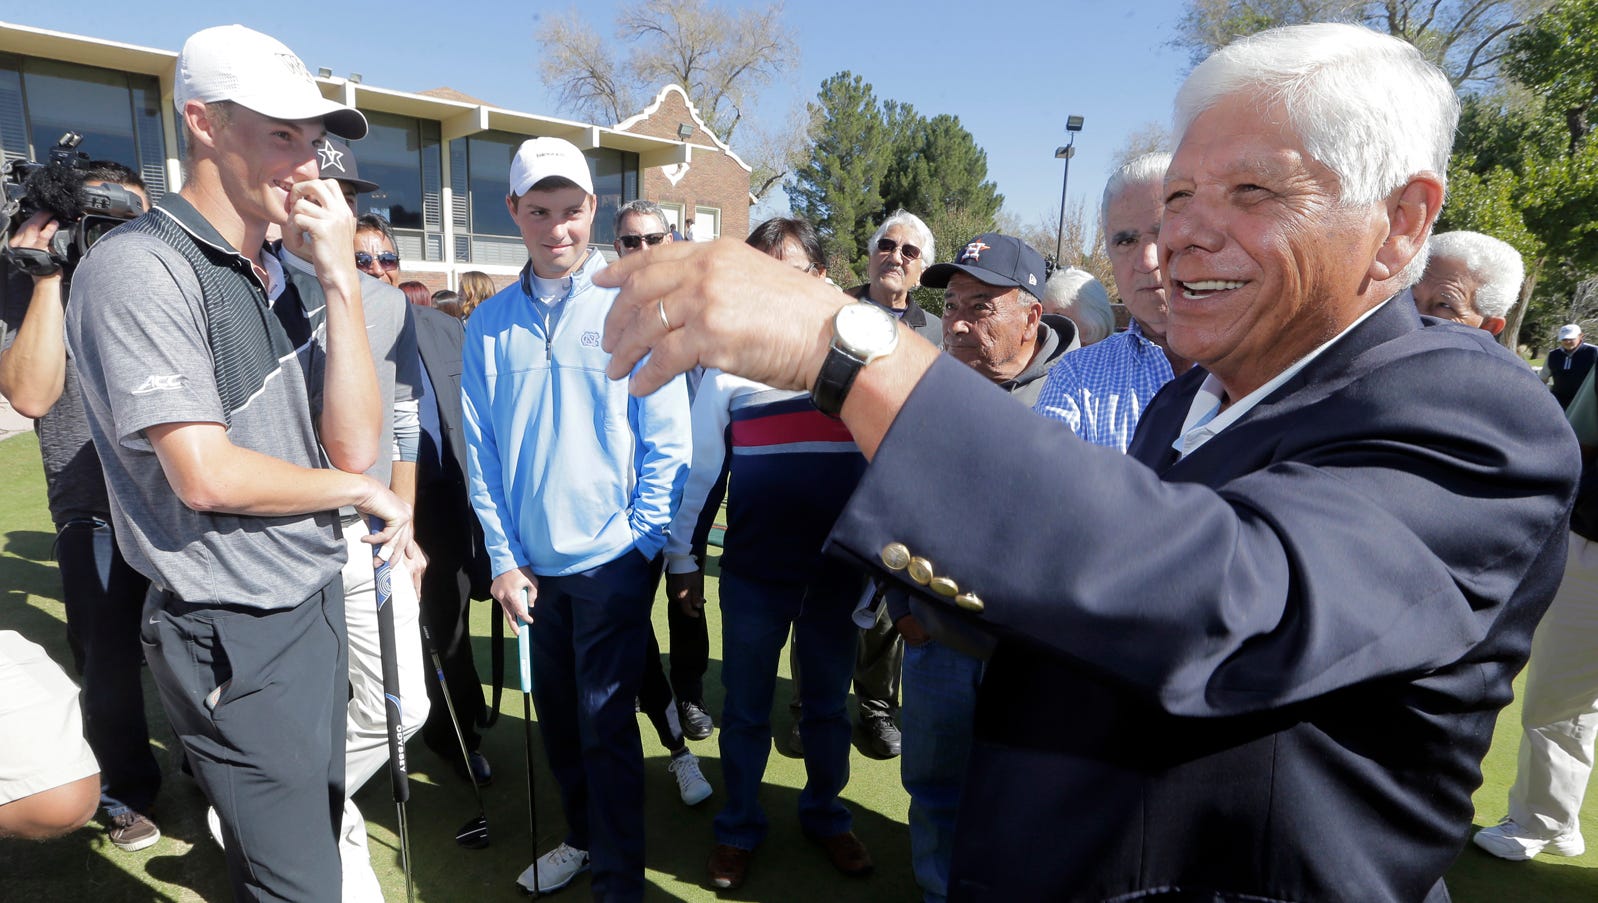 Trevino charms All-American golfers in El PAso